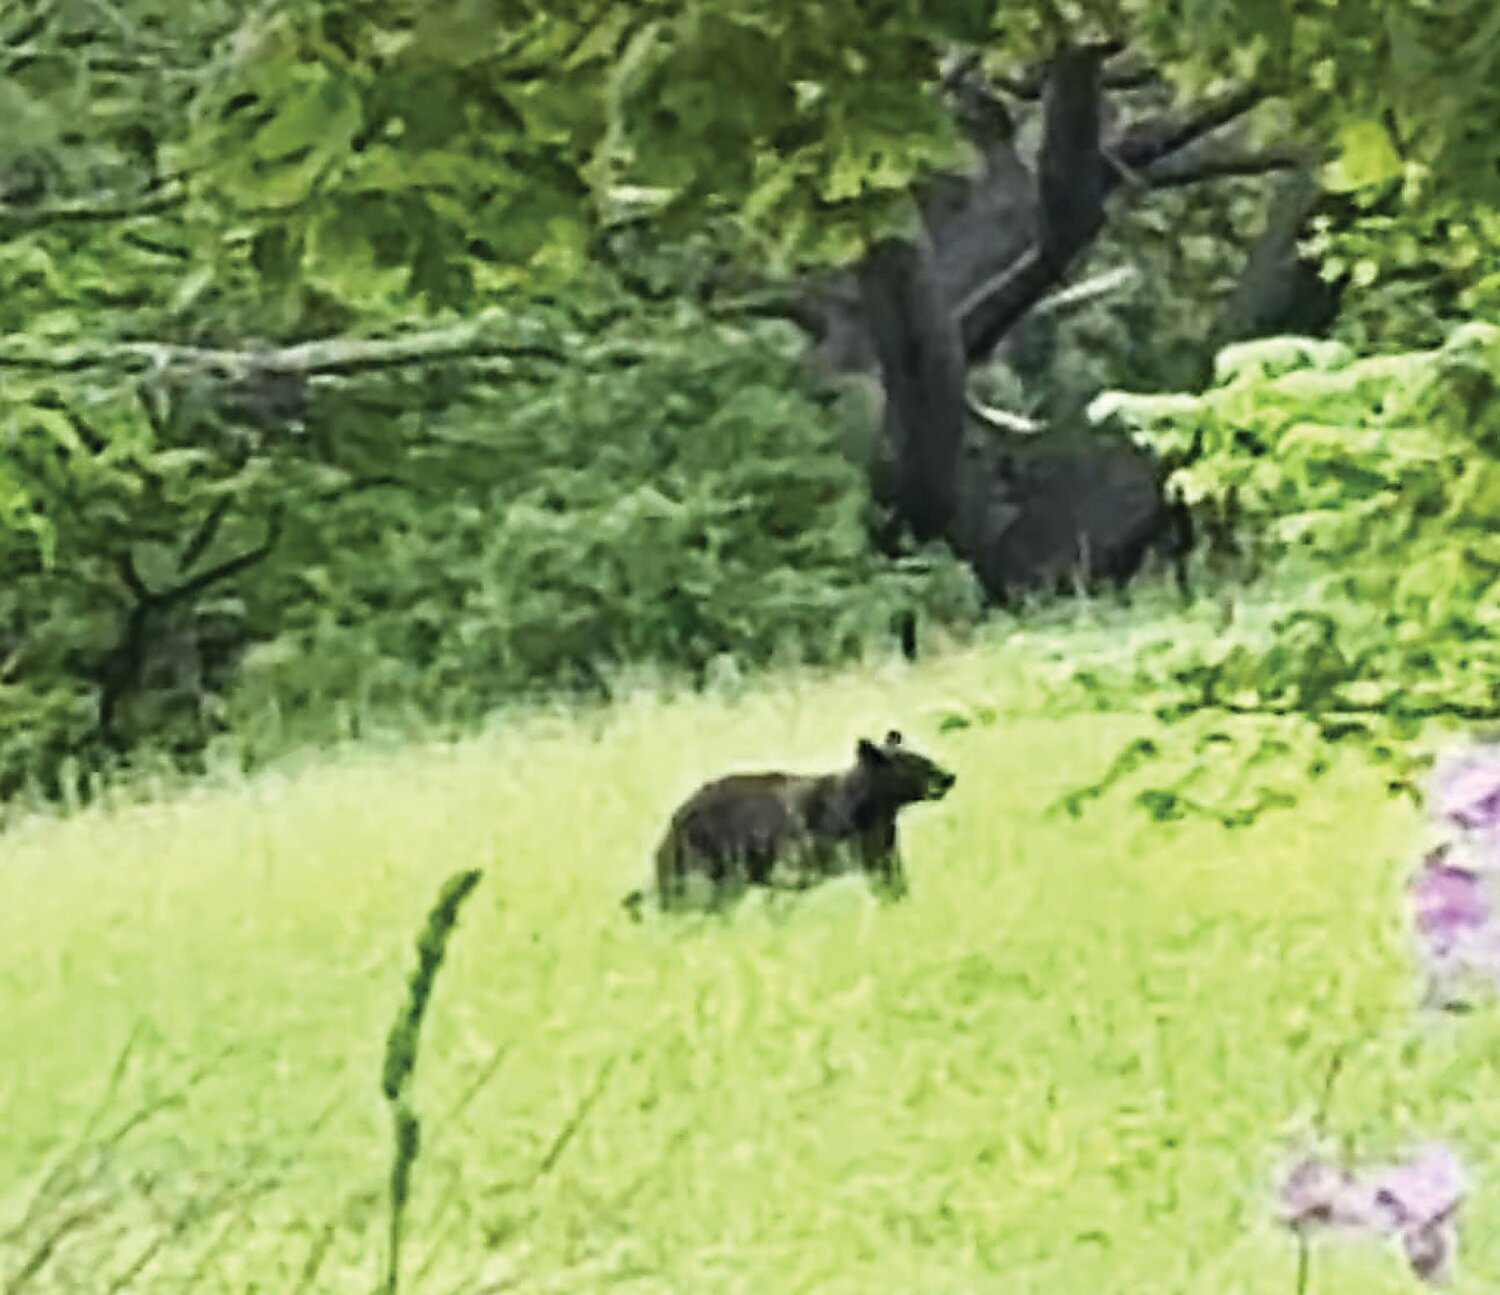 A black bear was spotted May 18 in Tinicum. A bear was also seen in Solebury two days later.